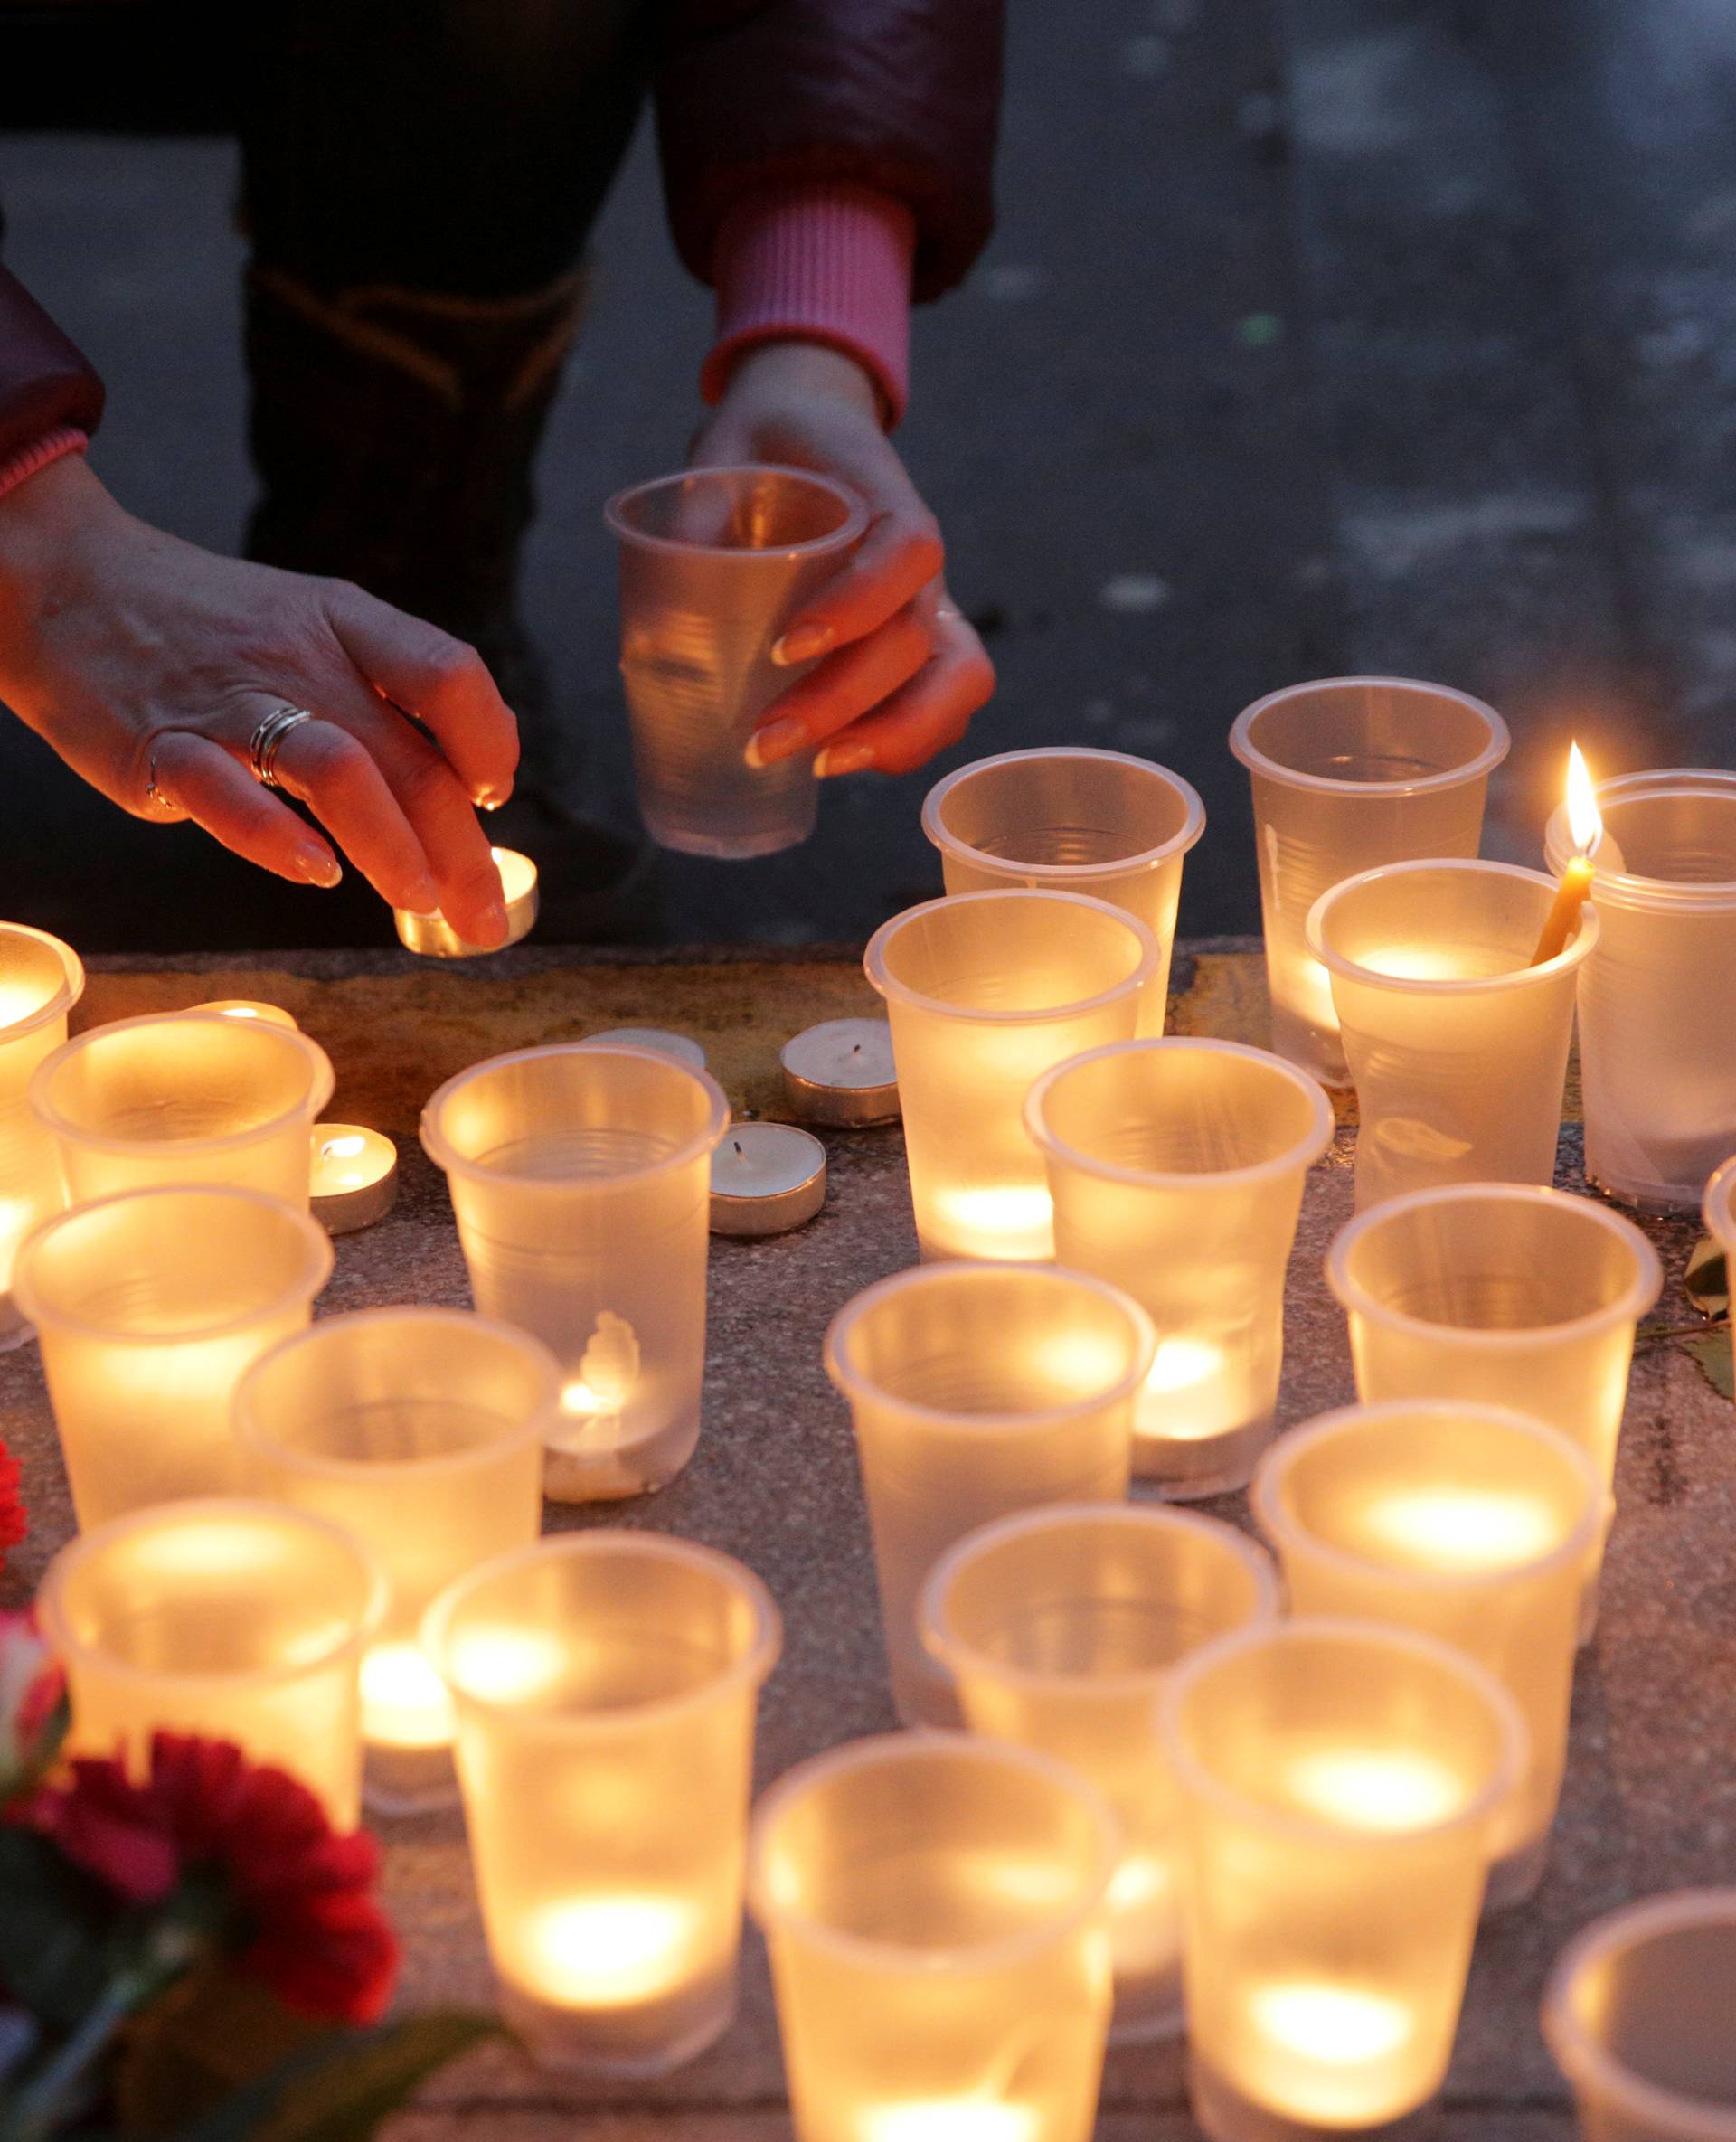 A woman leaves a candle during a memorial service for victims of a blast in St.Petersburg metro, outside Spasskaya metro station in St. Petersburg